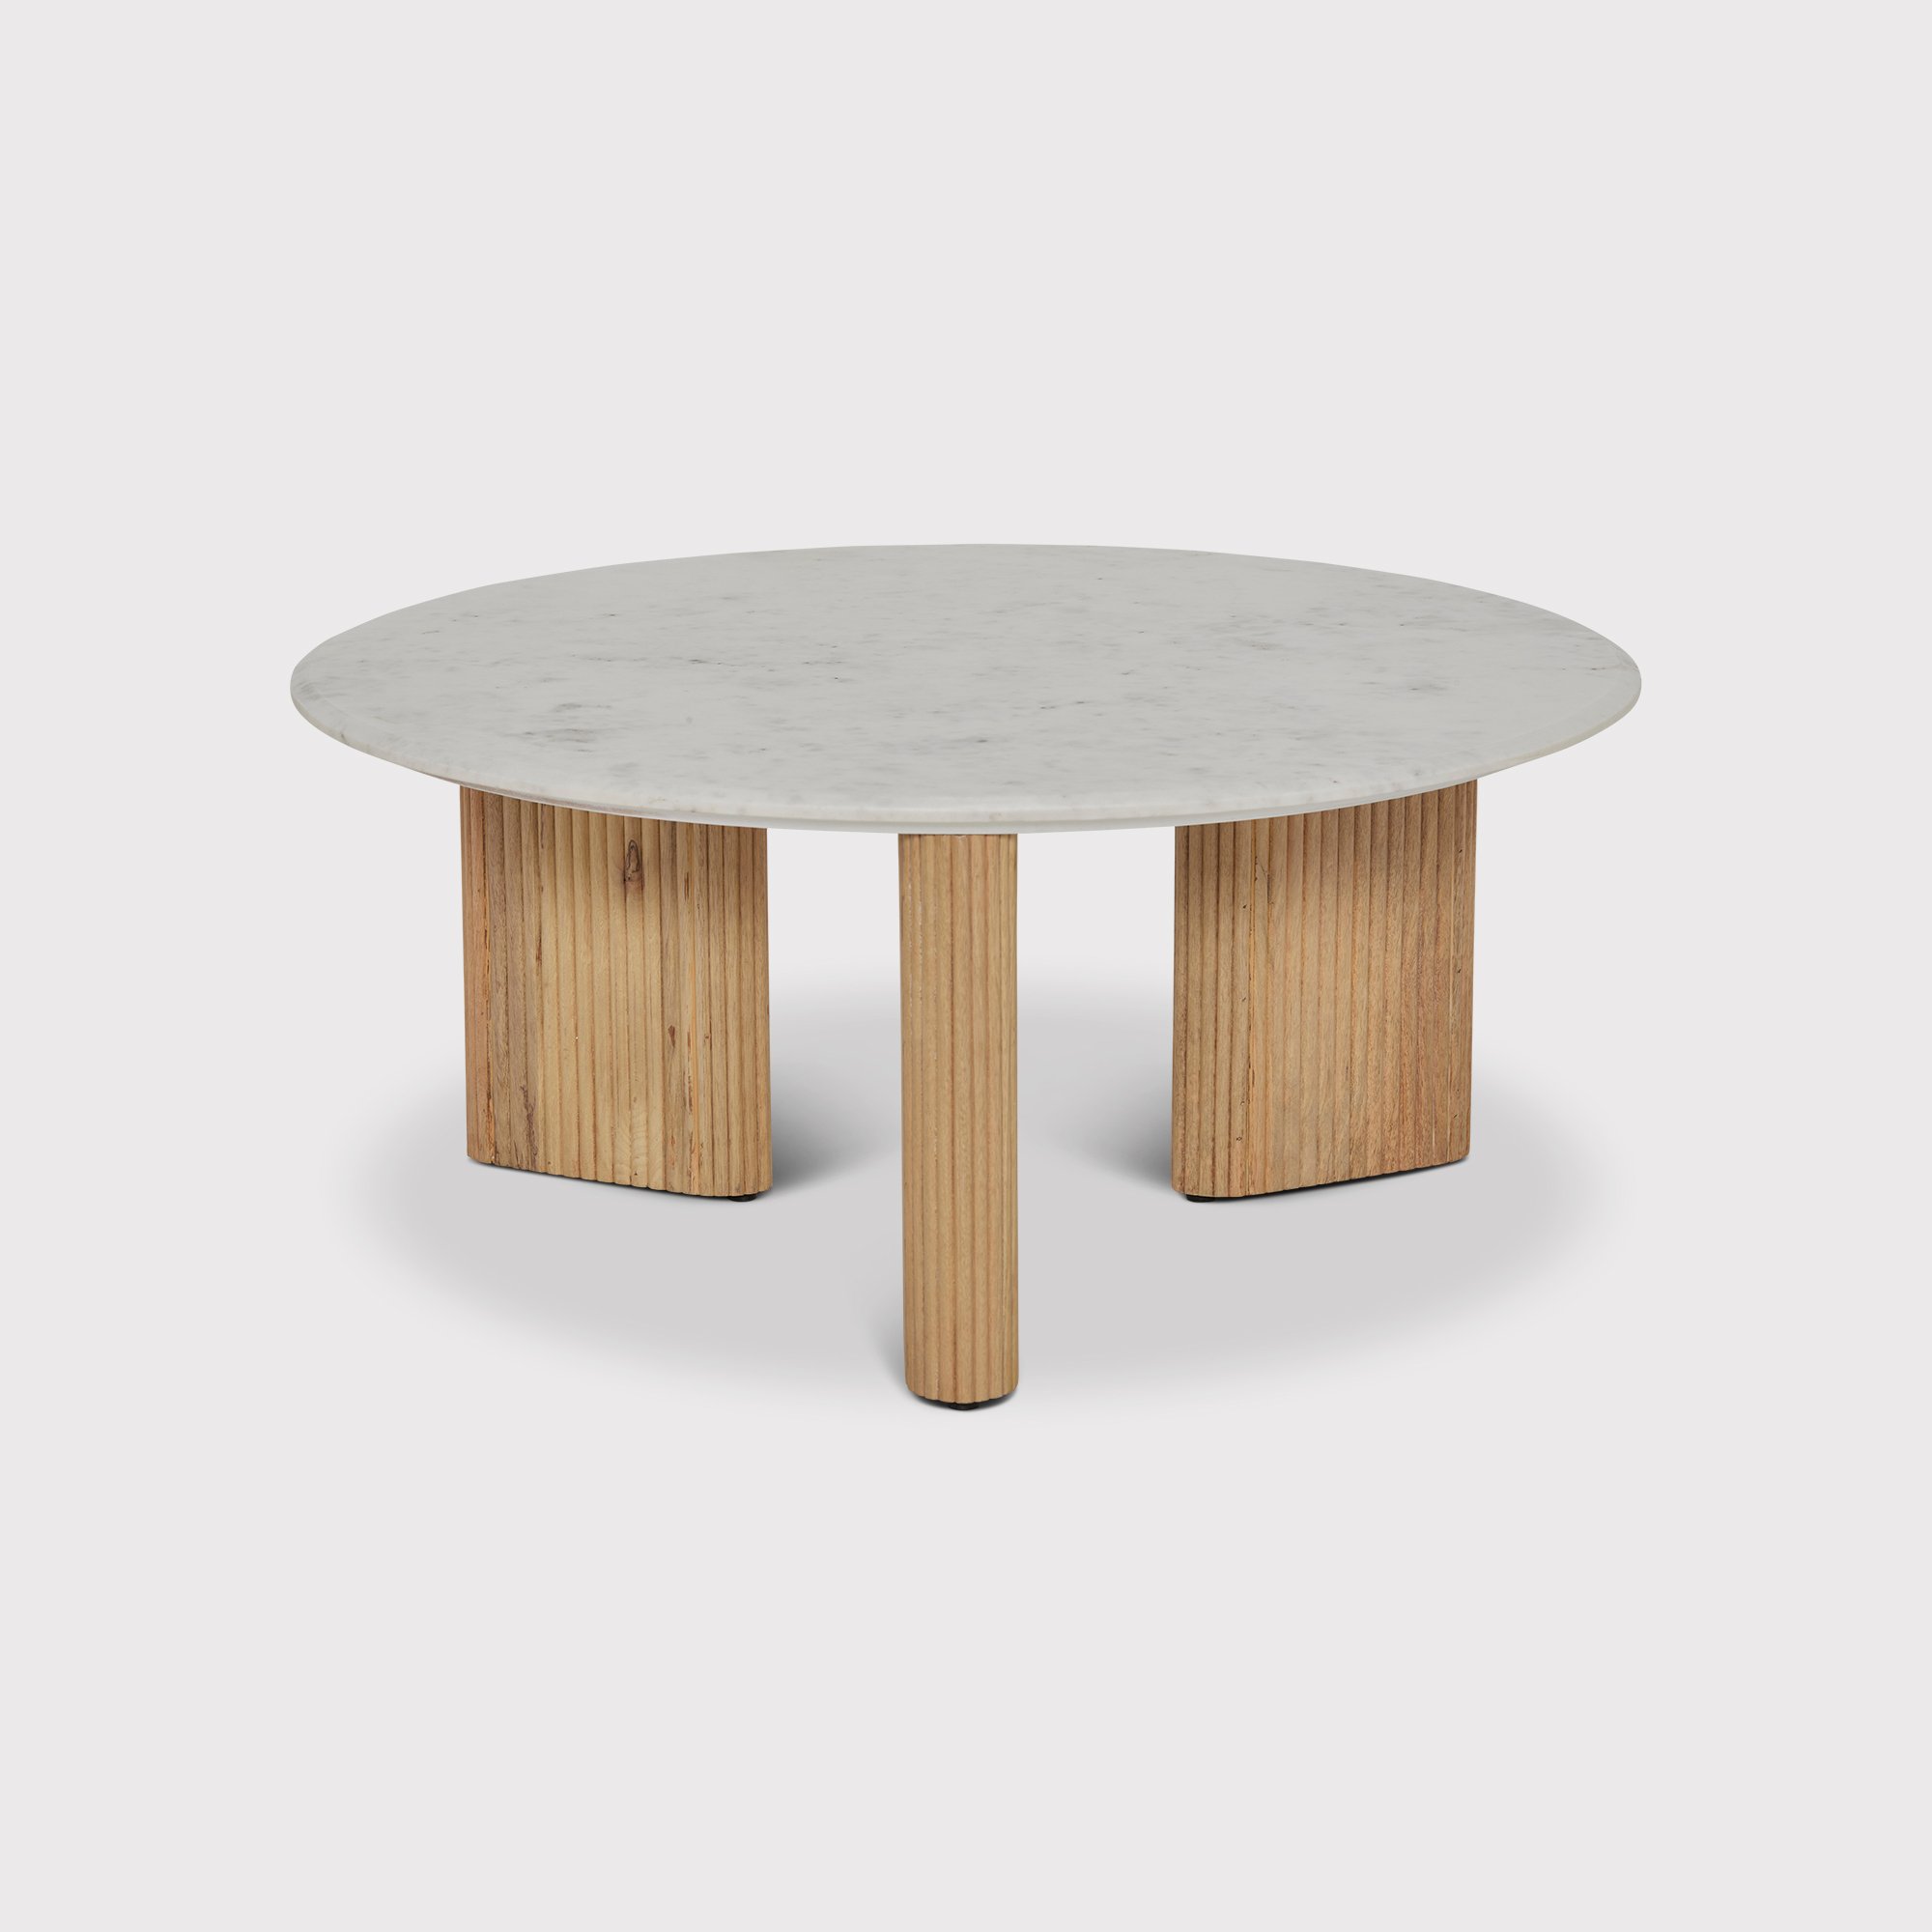 Fuji Coffee Table, Round, Neutral | Barker & Stonehouse